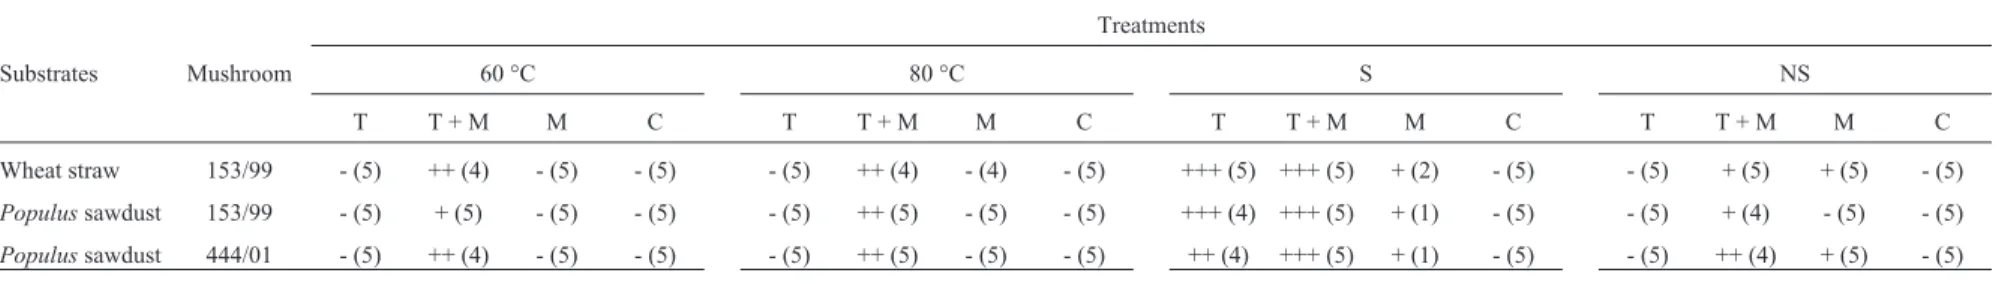 Table 5 - Growth of green mold disease after substrate immersion in alkalinized water during different times